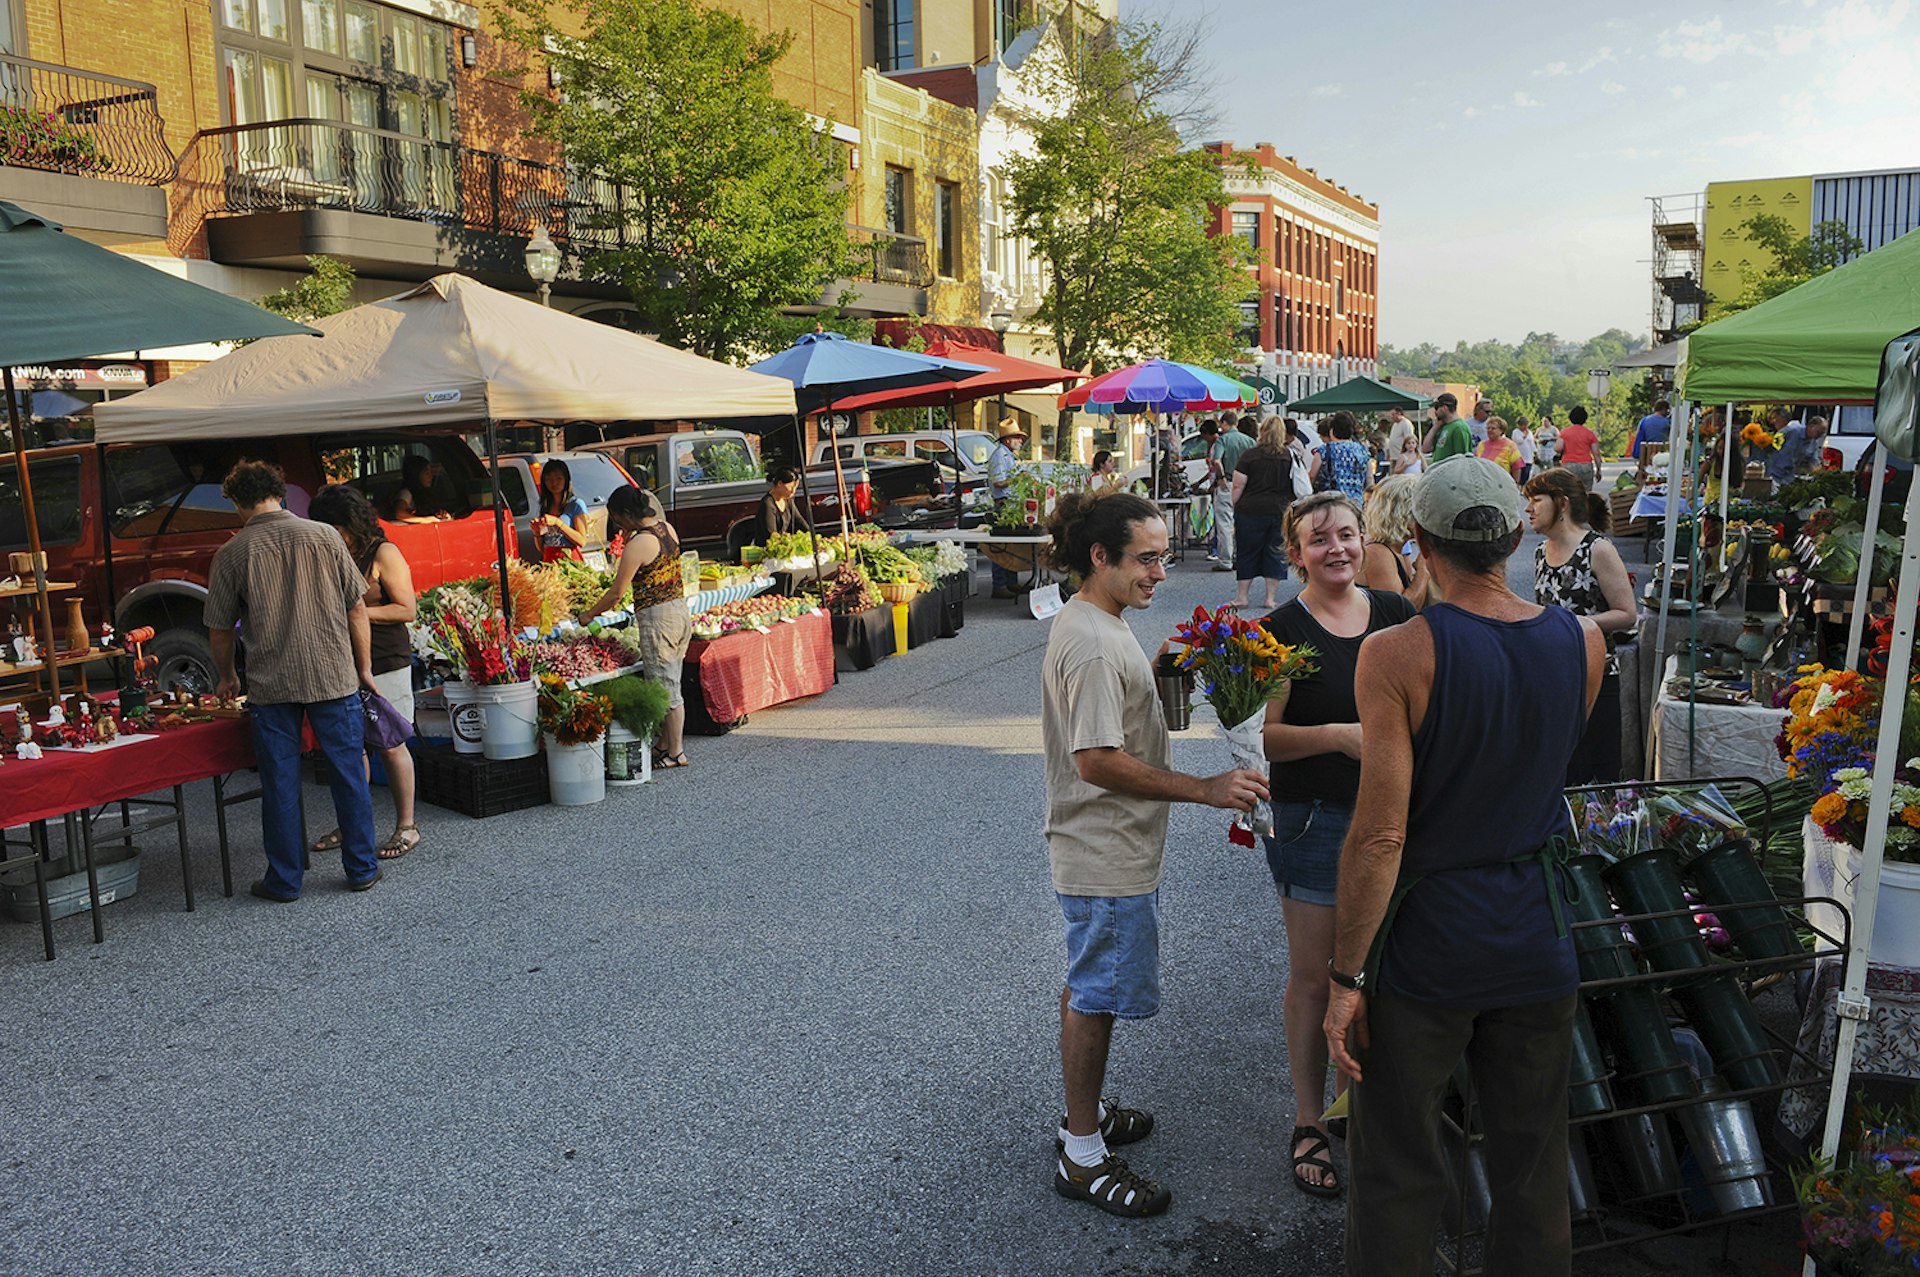 Grab the freshest produce at Fayetteville's Farmers' Market. Image courtesy of Arkansas Department of Parks and Tourism